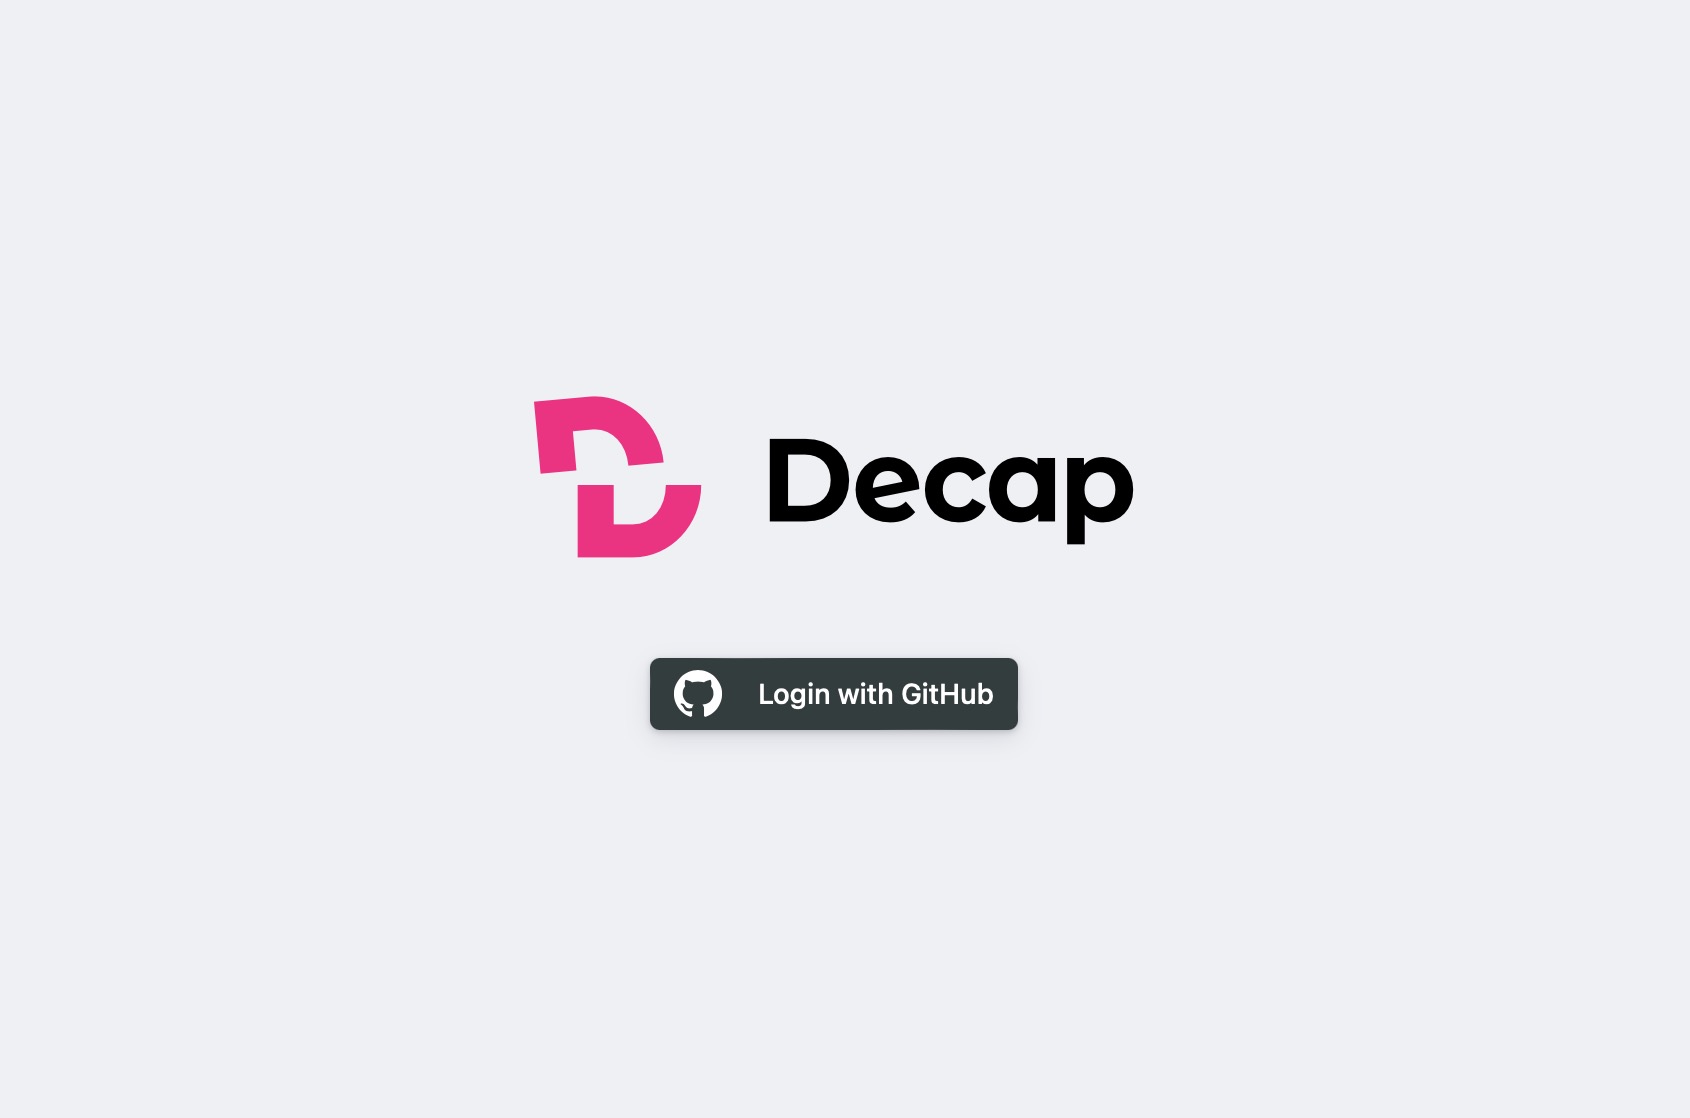 Decap CMS with the Login with Github button